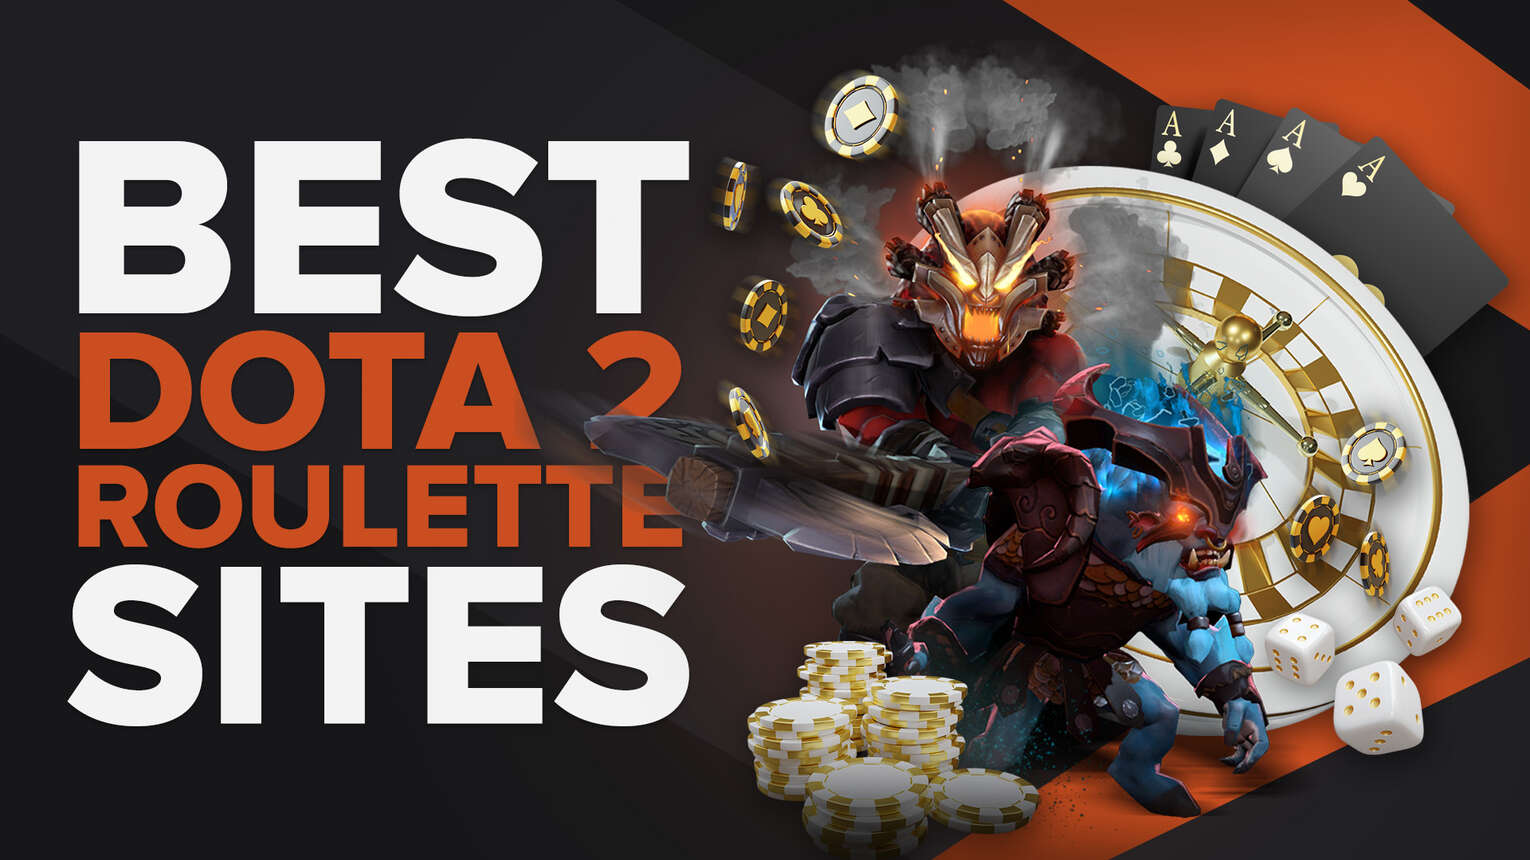 Best Dota 2 Roulette Sites with Dota 2 Skins Gambling